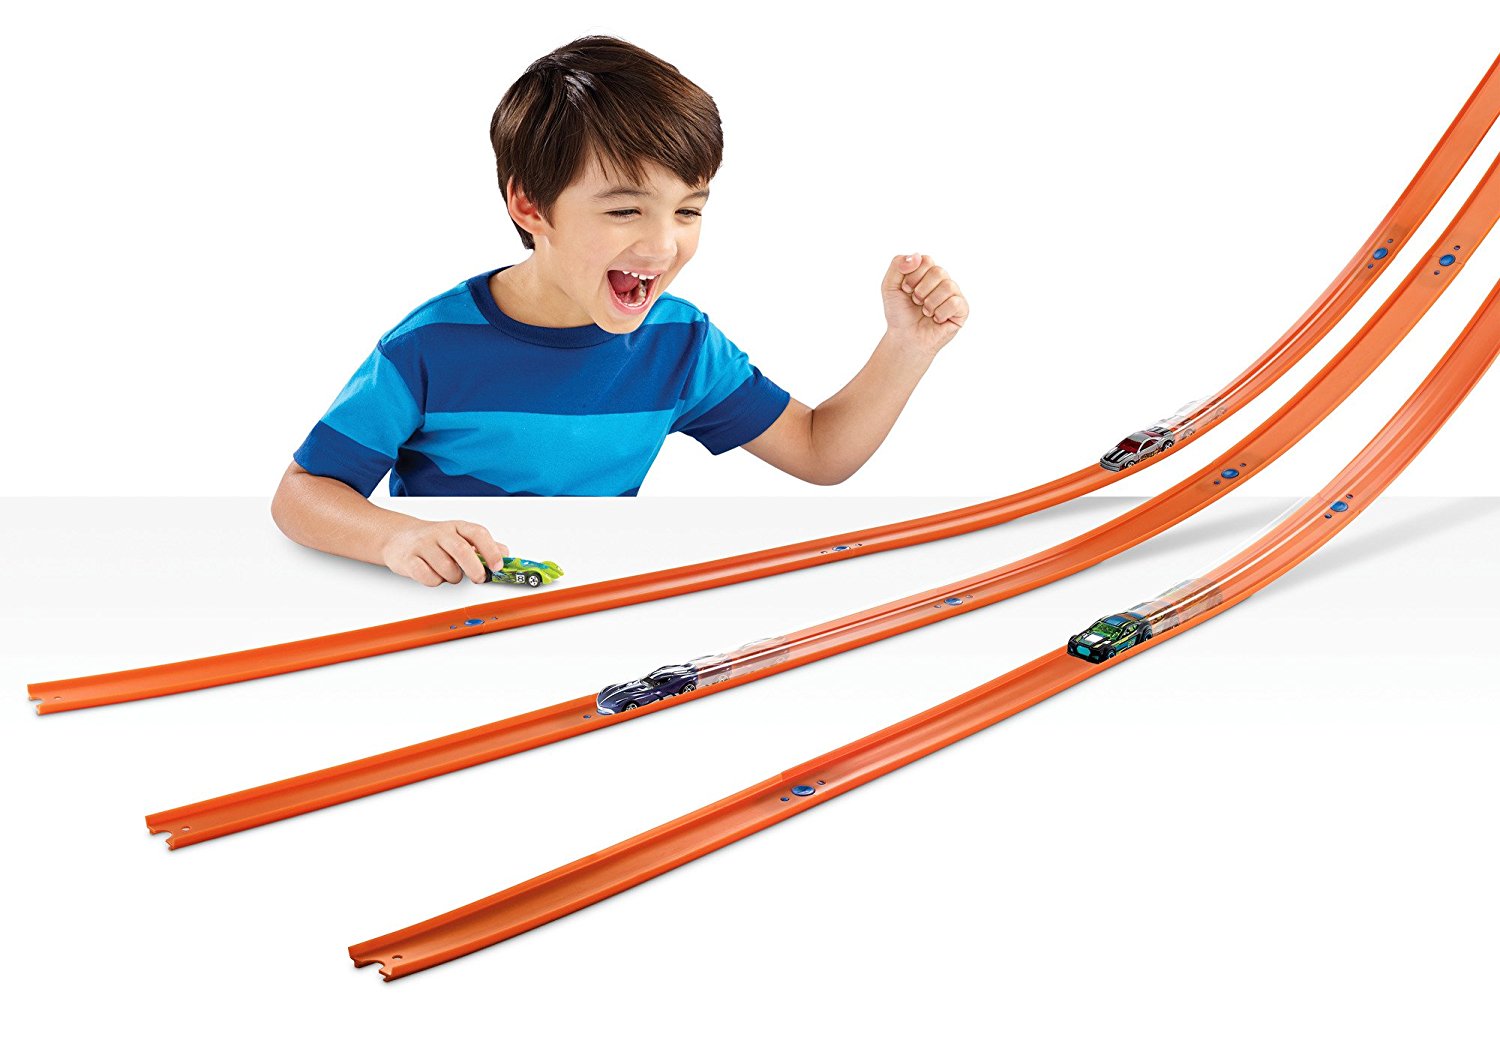 Hot Wheels Track Builder Straight Track with Car, 15 Feet - Styles May Vary, Orange and Blue (BHT77) - image 2 of 7